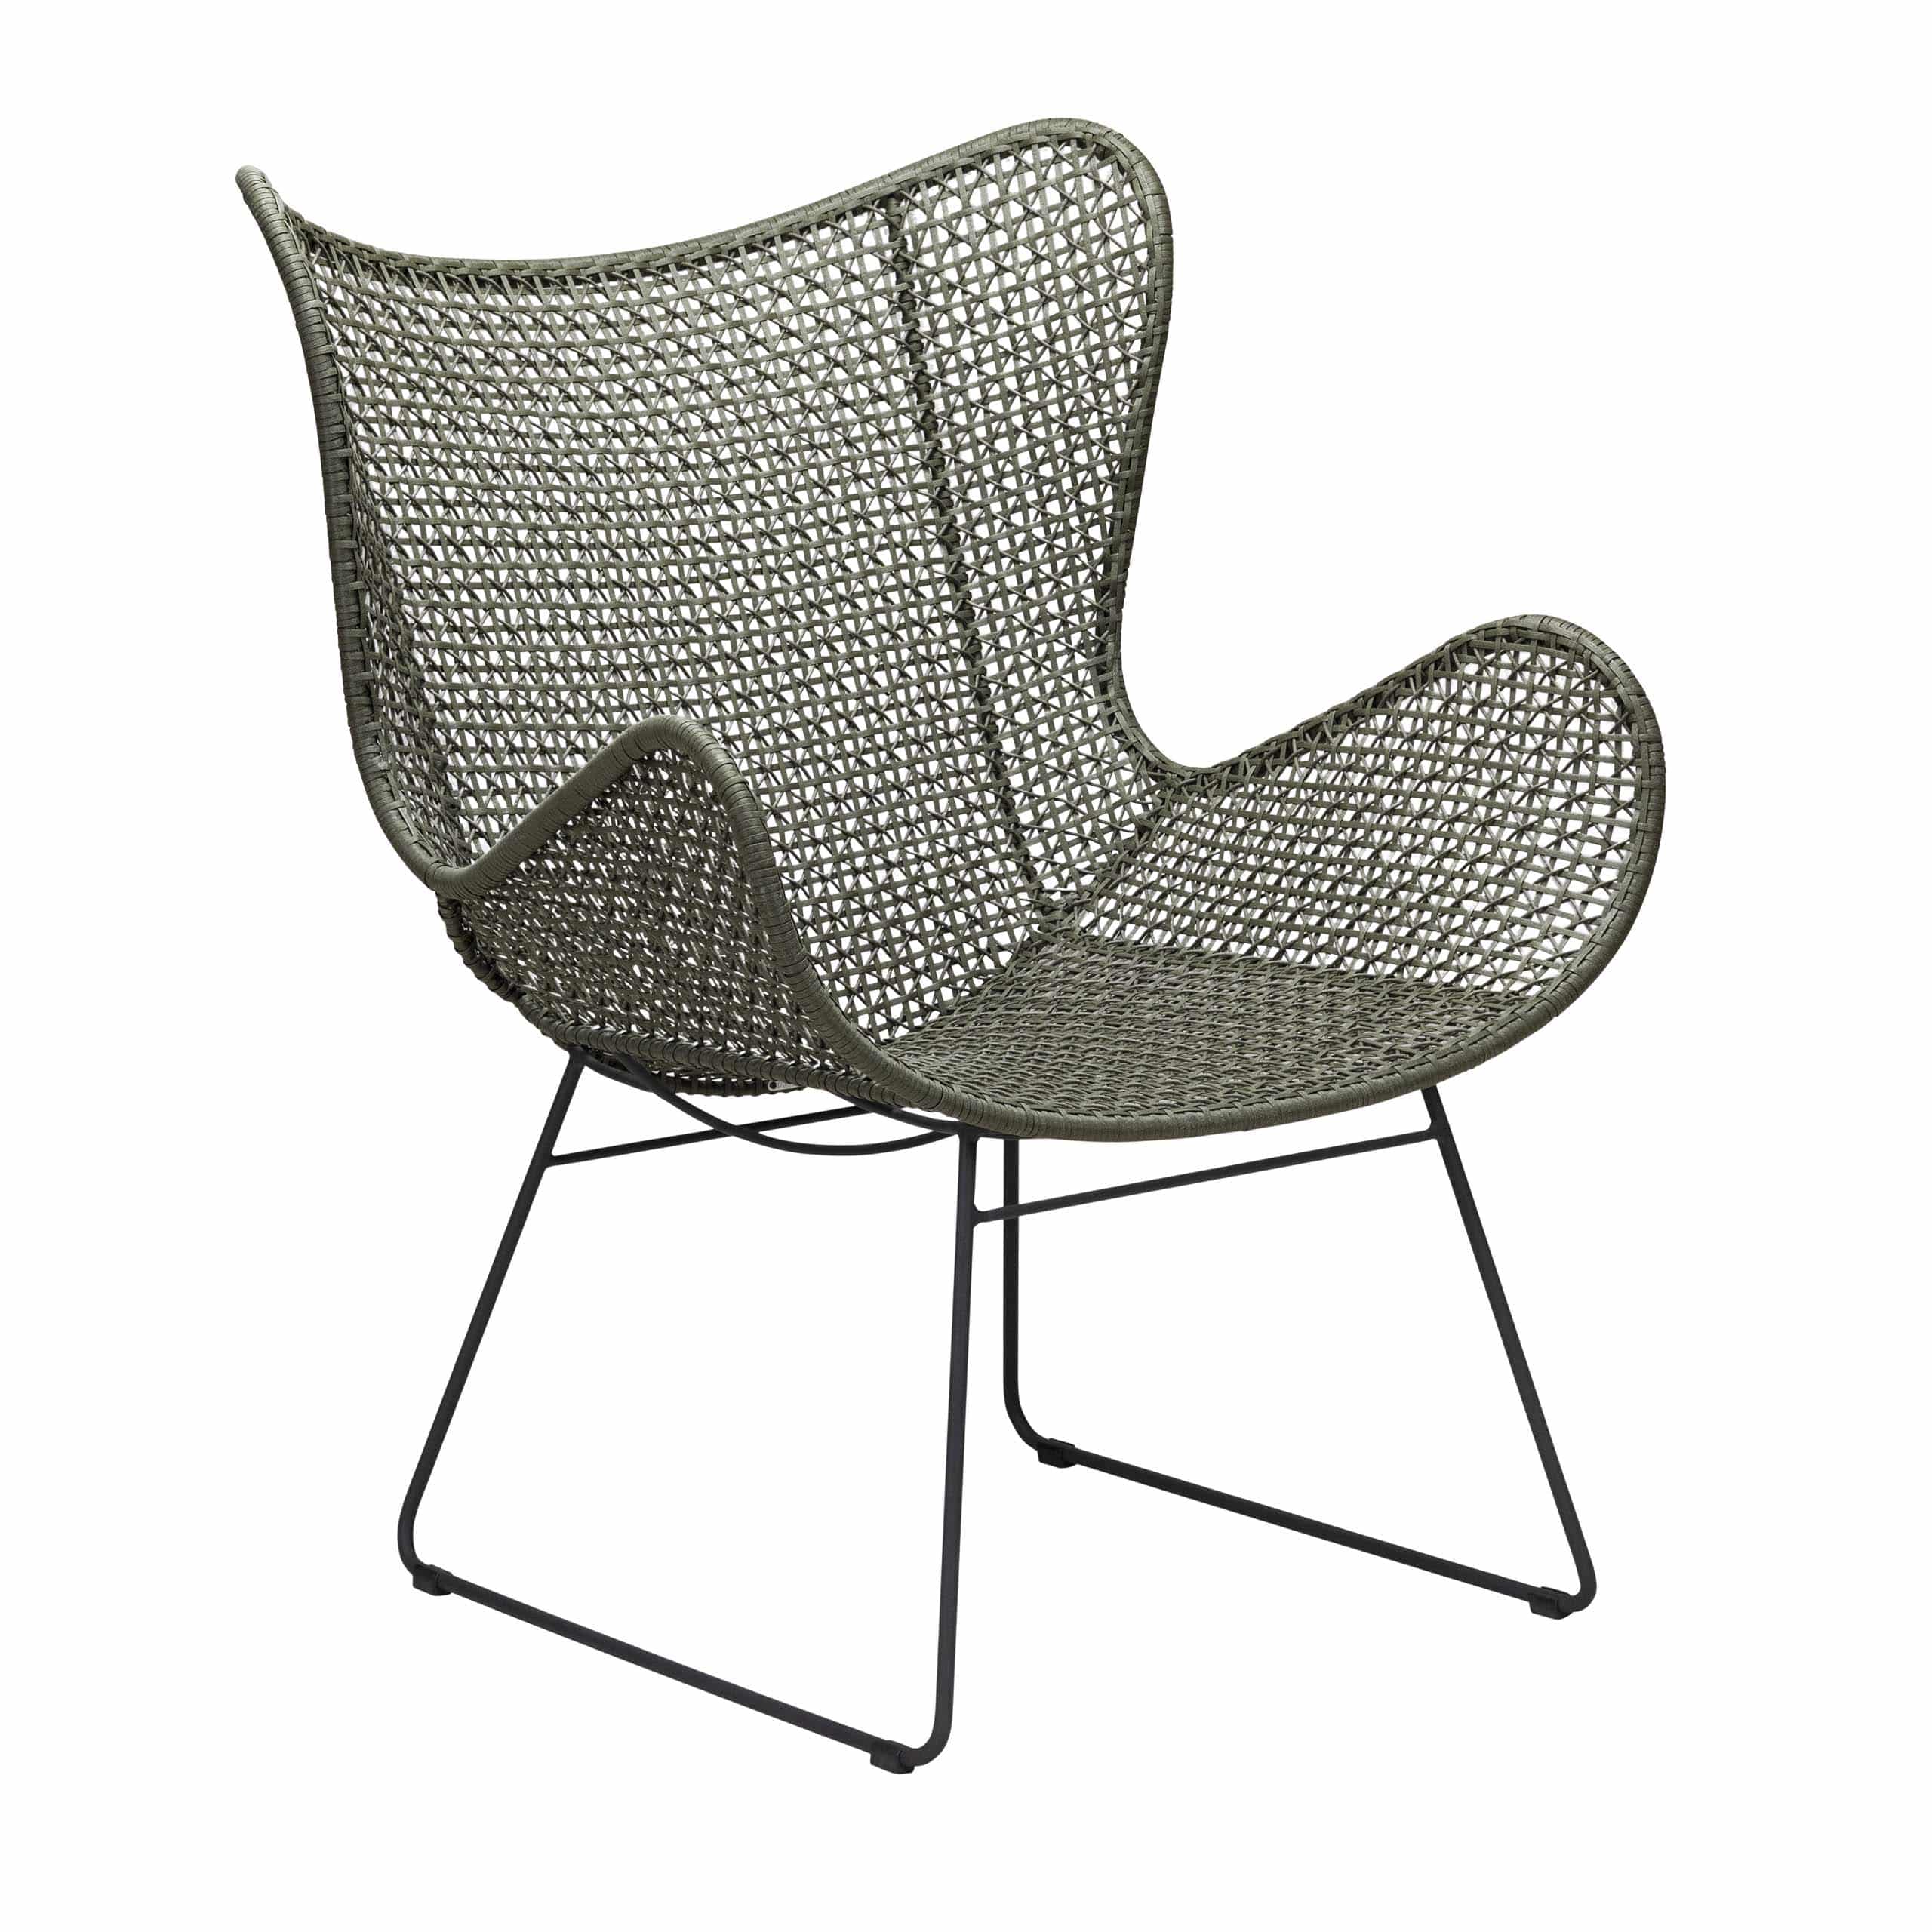 Design Warehouse - 128321 - Lilly Outdoor Wing Chair  - Moss / Graphite